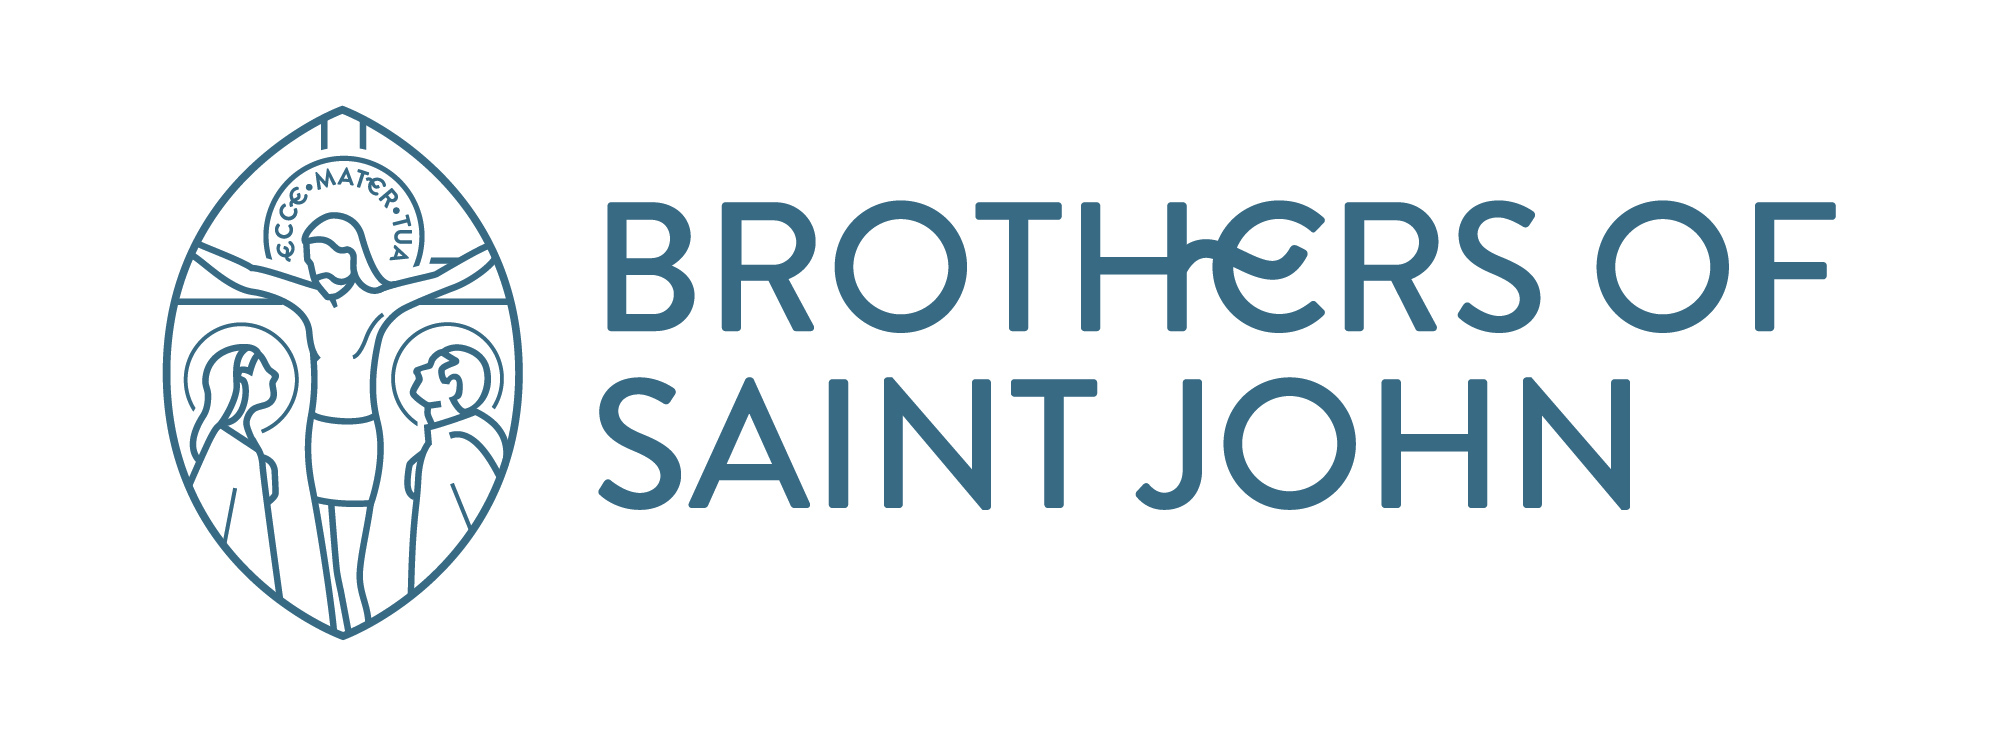 The brothers of St John have been 10 years at St Antony's - join them for a celebration on Sunday 3rd October at 12 noon